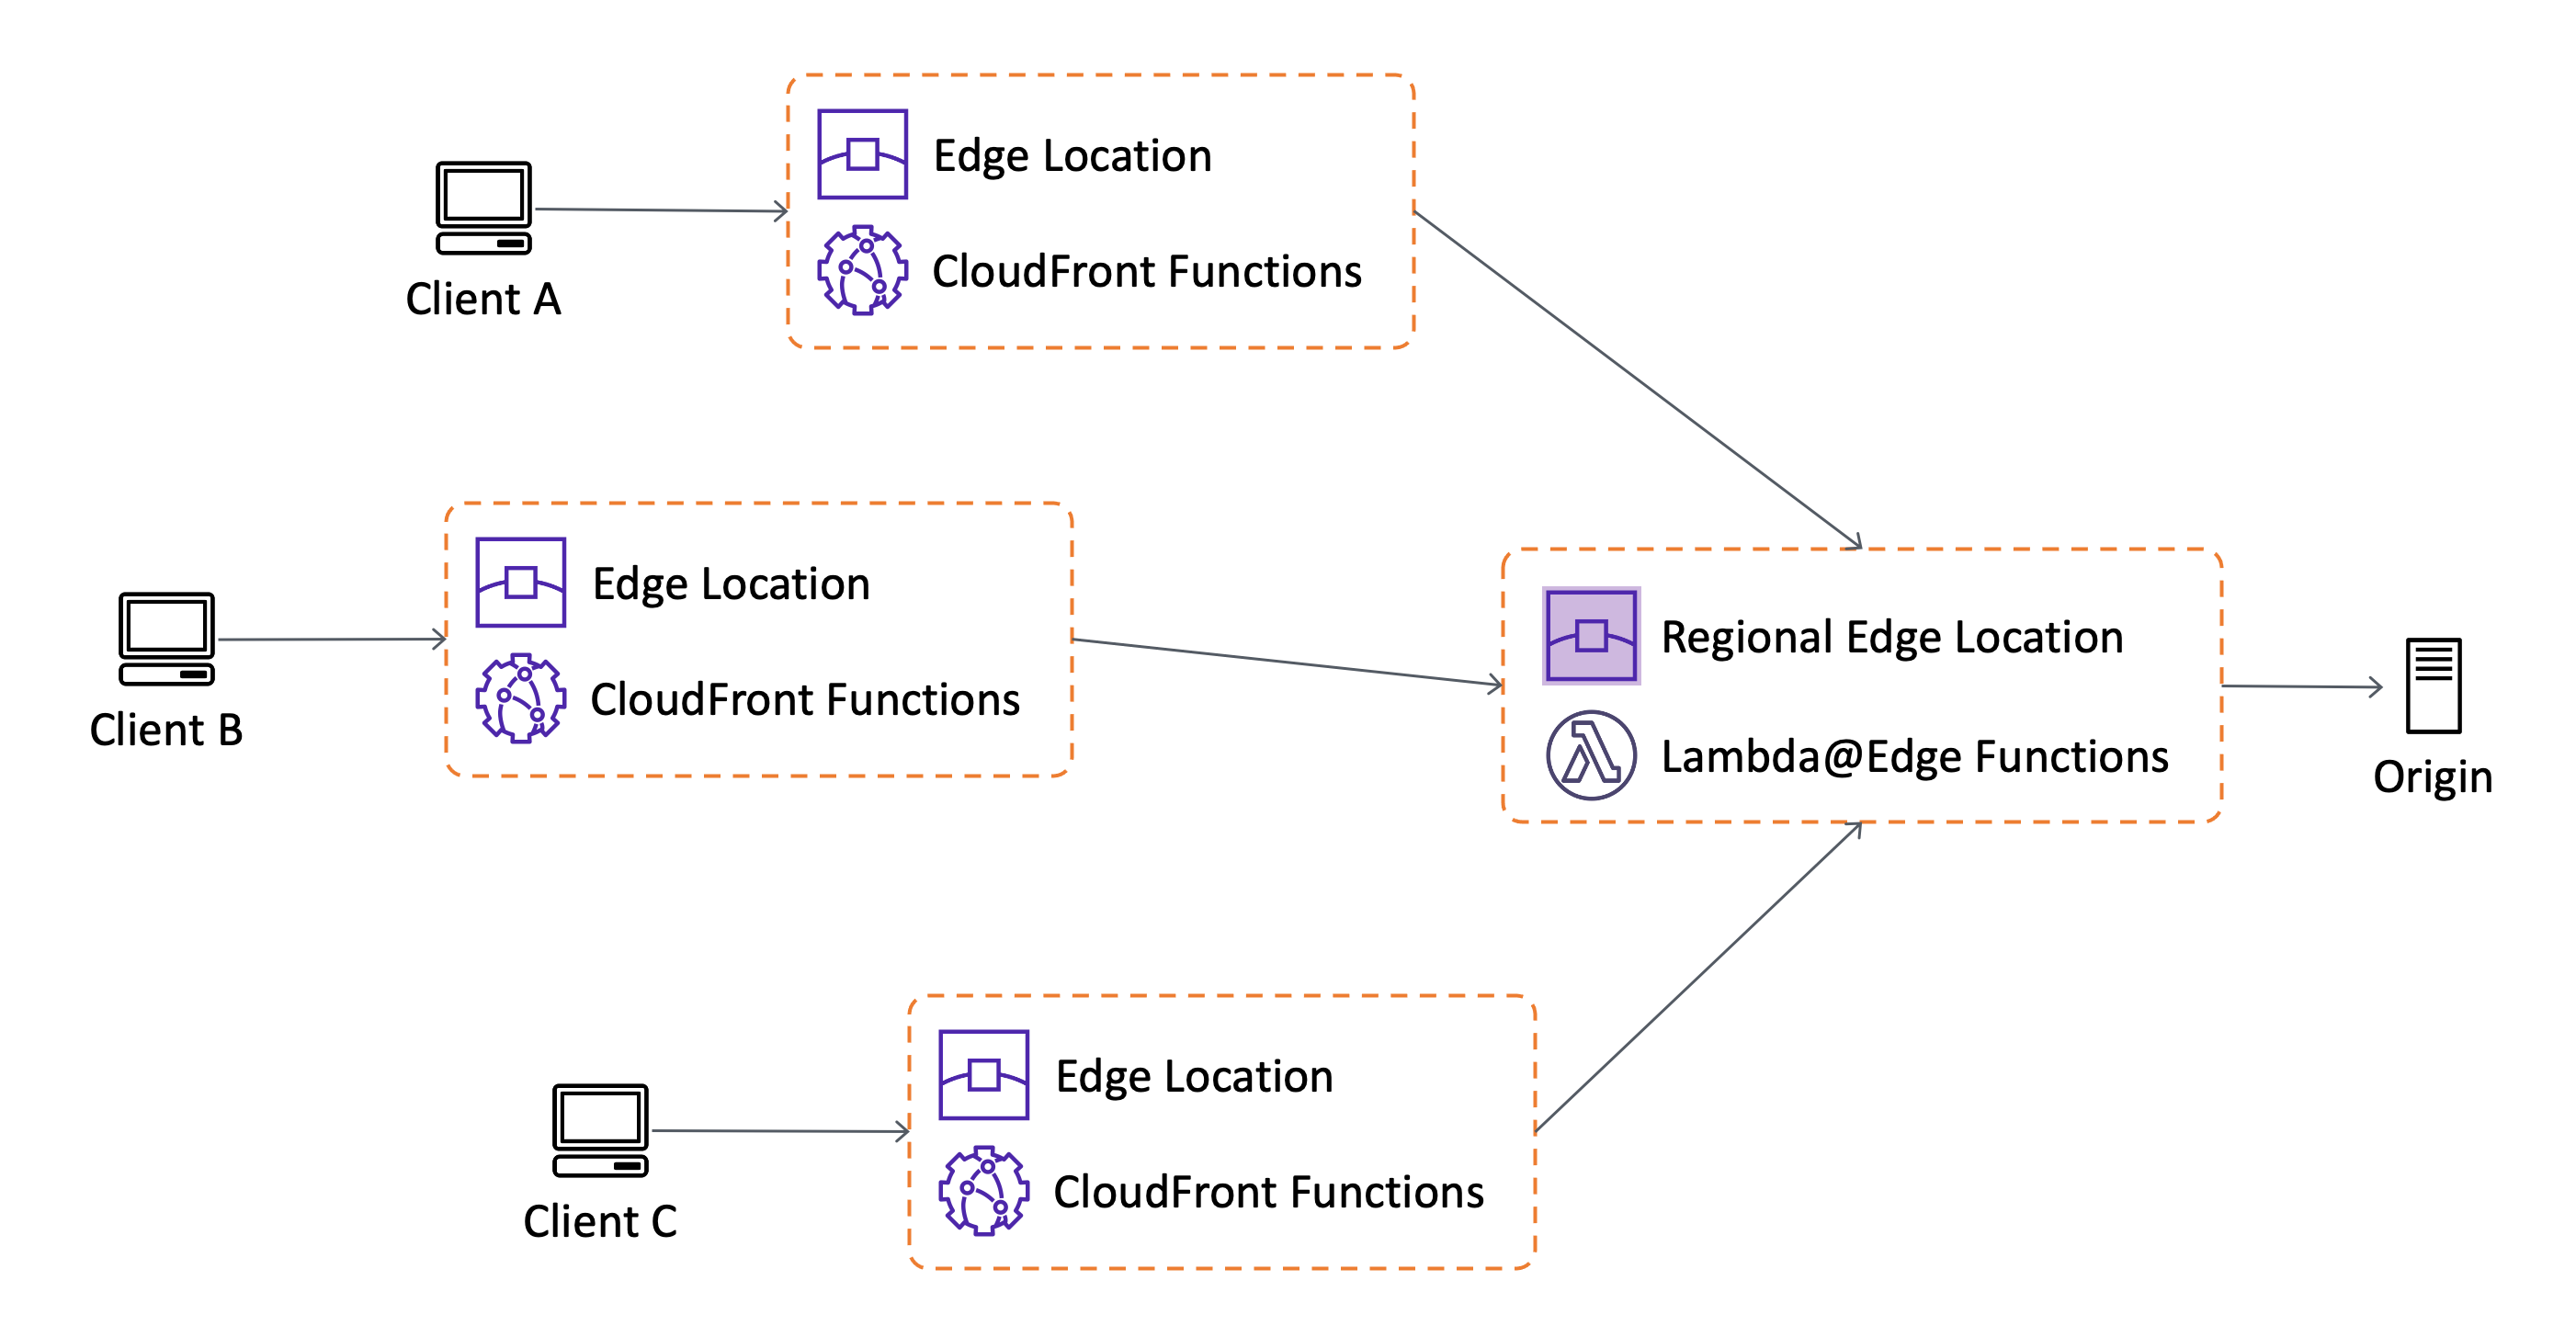 CloudFront Functions Location